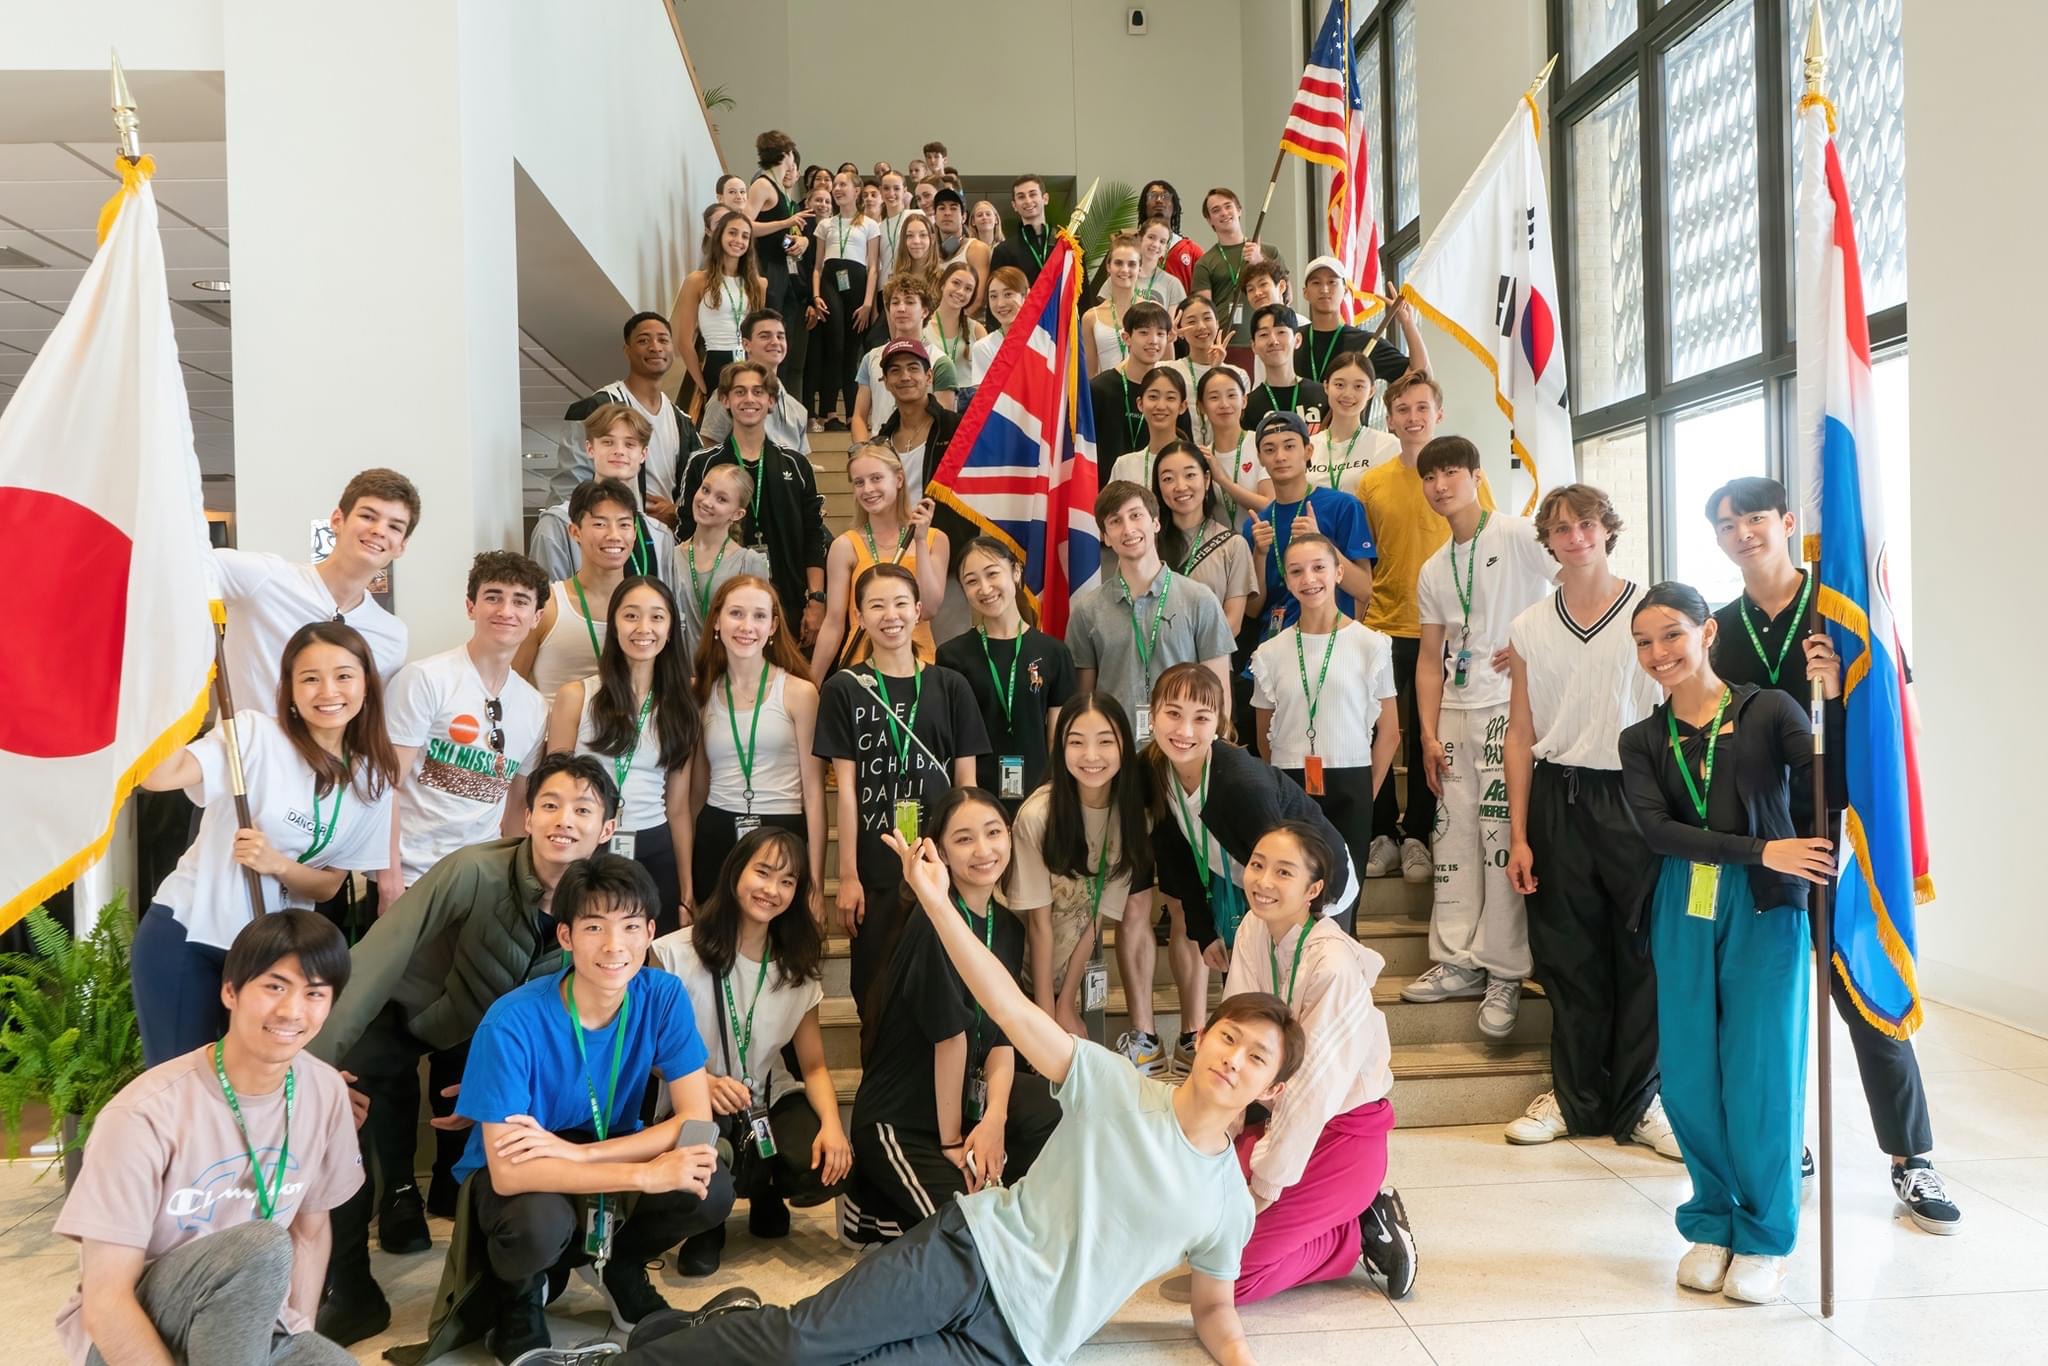 A large international group of dancers ranging between 15 and 27 years old gather on a marble staircase for a casual group photo. They wer either srteet clothing or athleisure wear, and five of them hold flags to various nations.